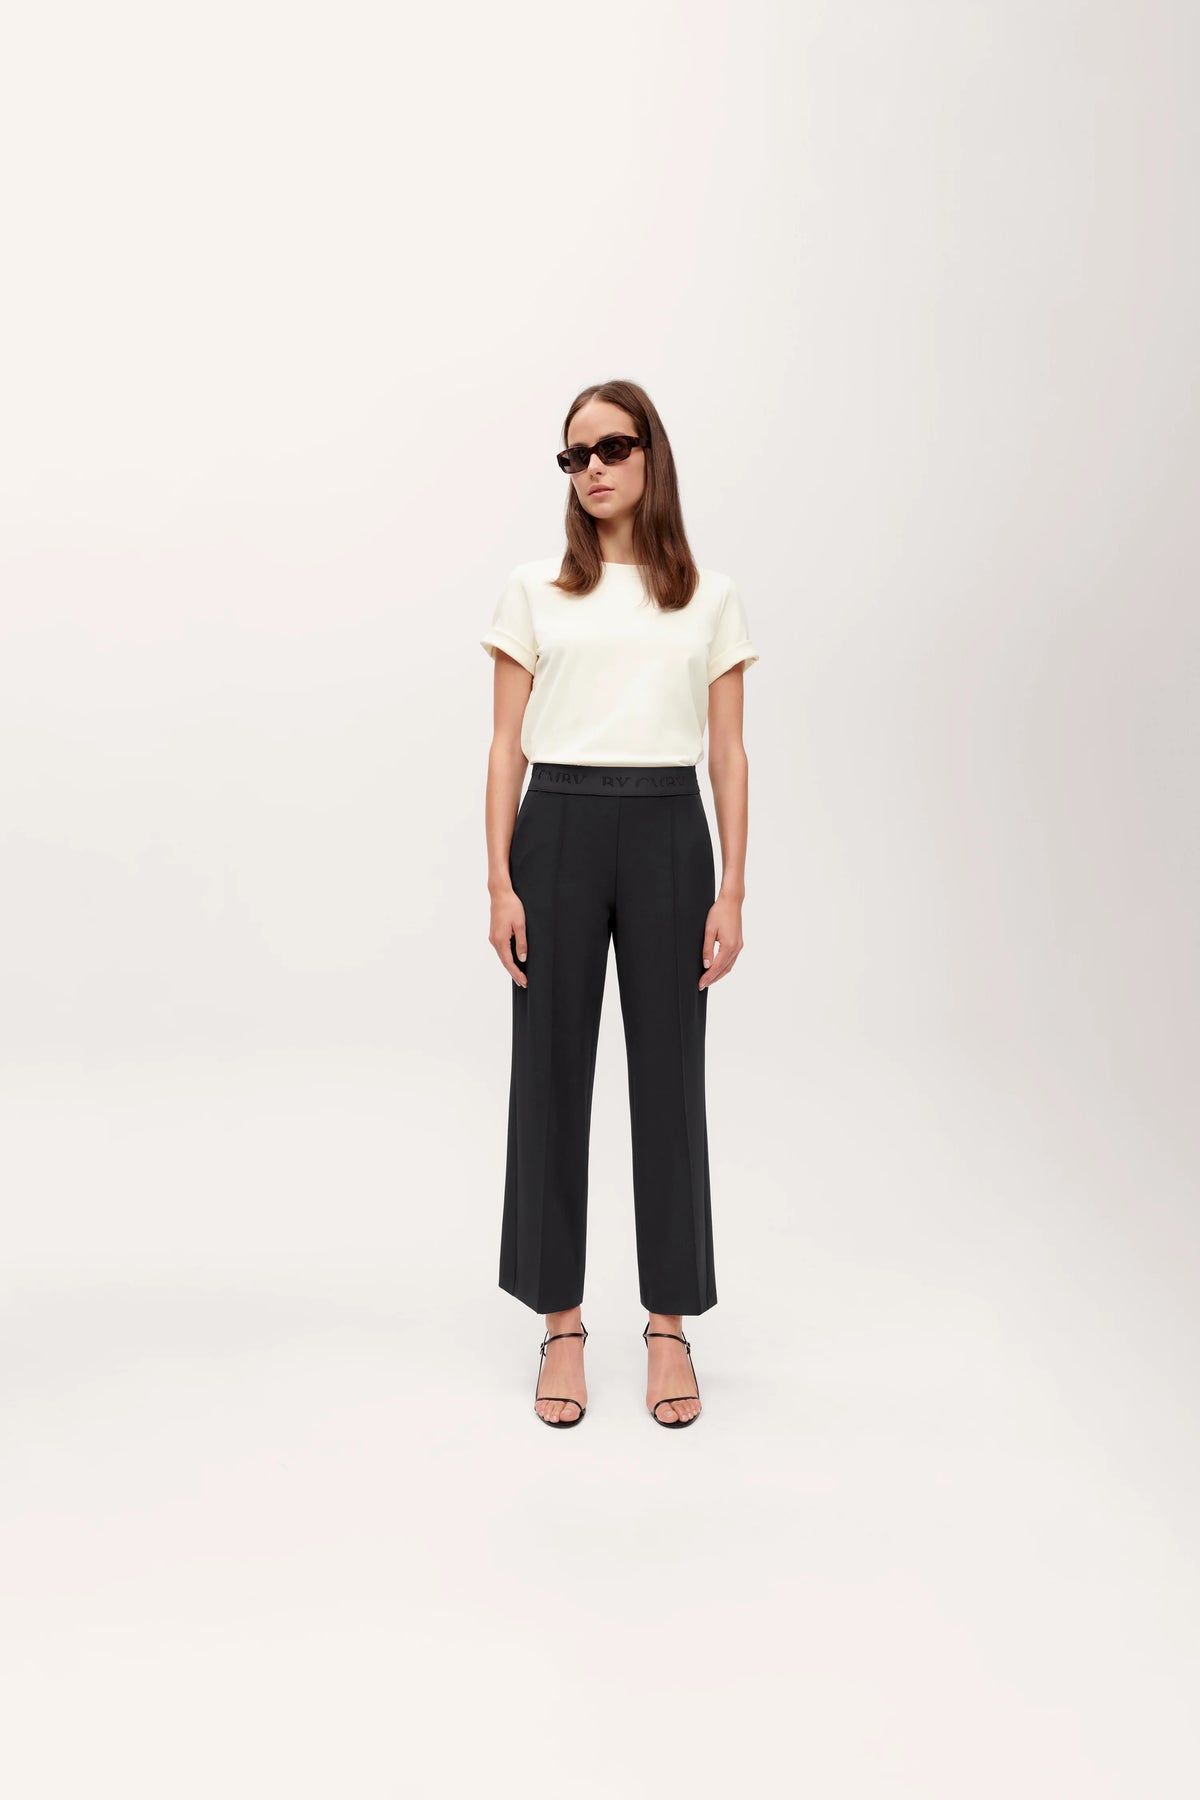 Cambio Scarlet Pant – Très Chic